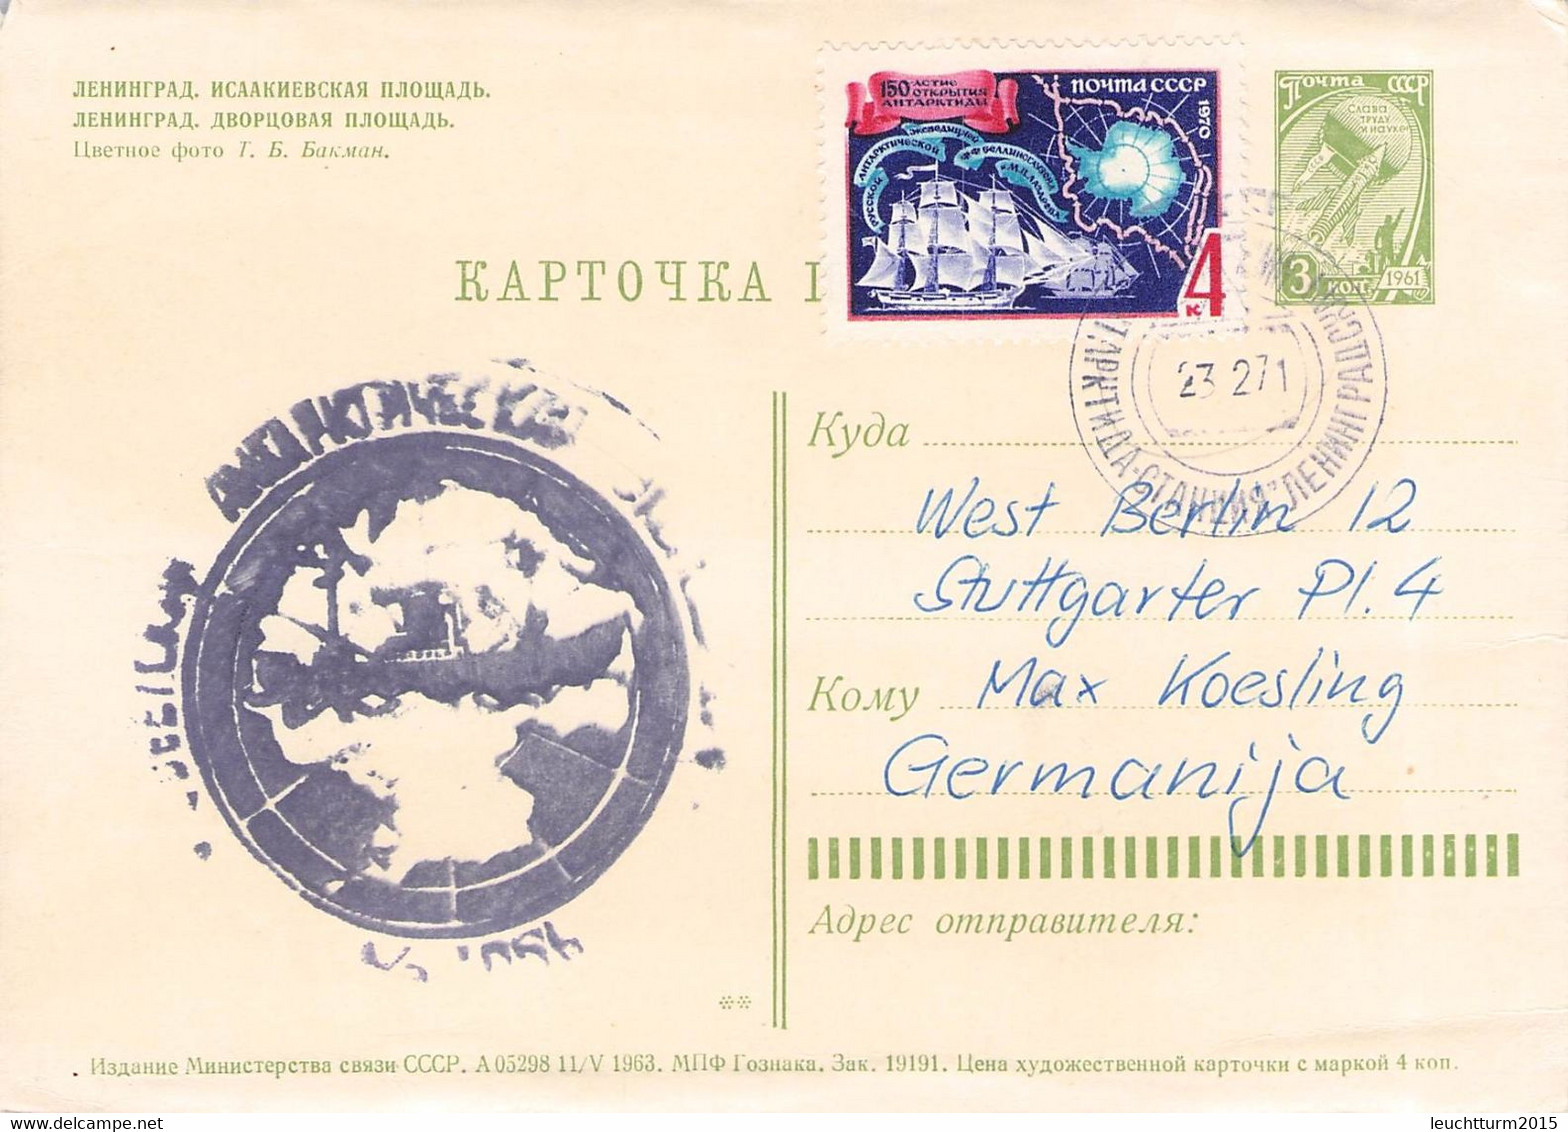 USSR - SMALL COLLECTION ARCTIS/ANTARCTIC COVERS / QG105